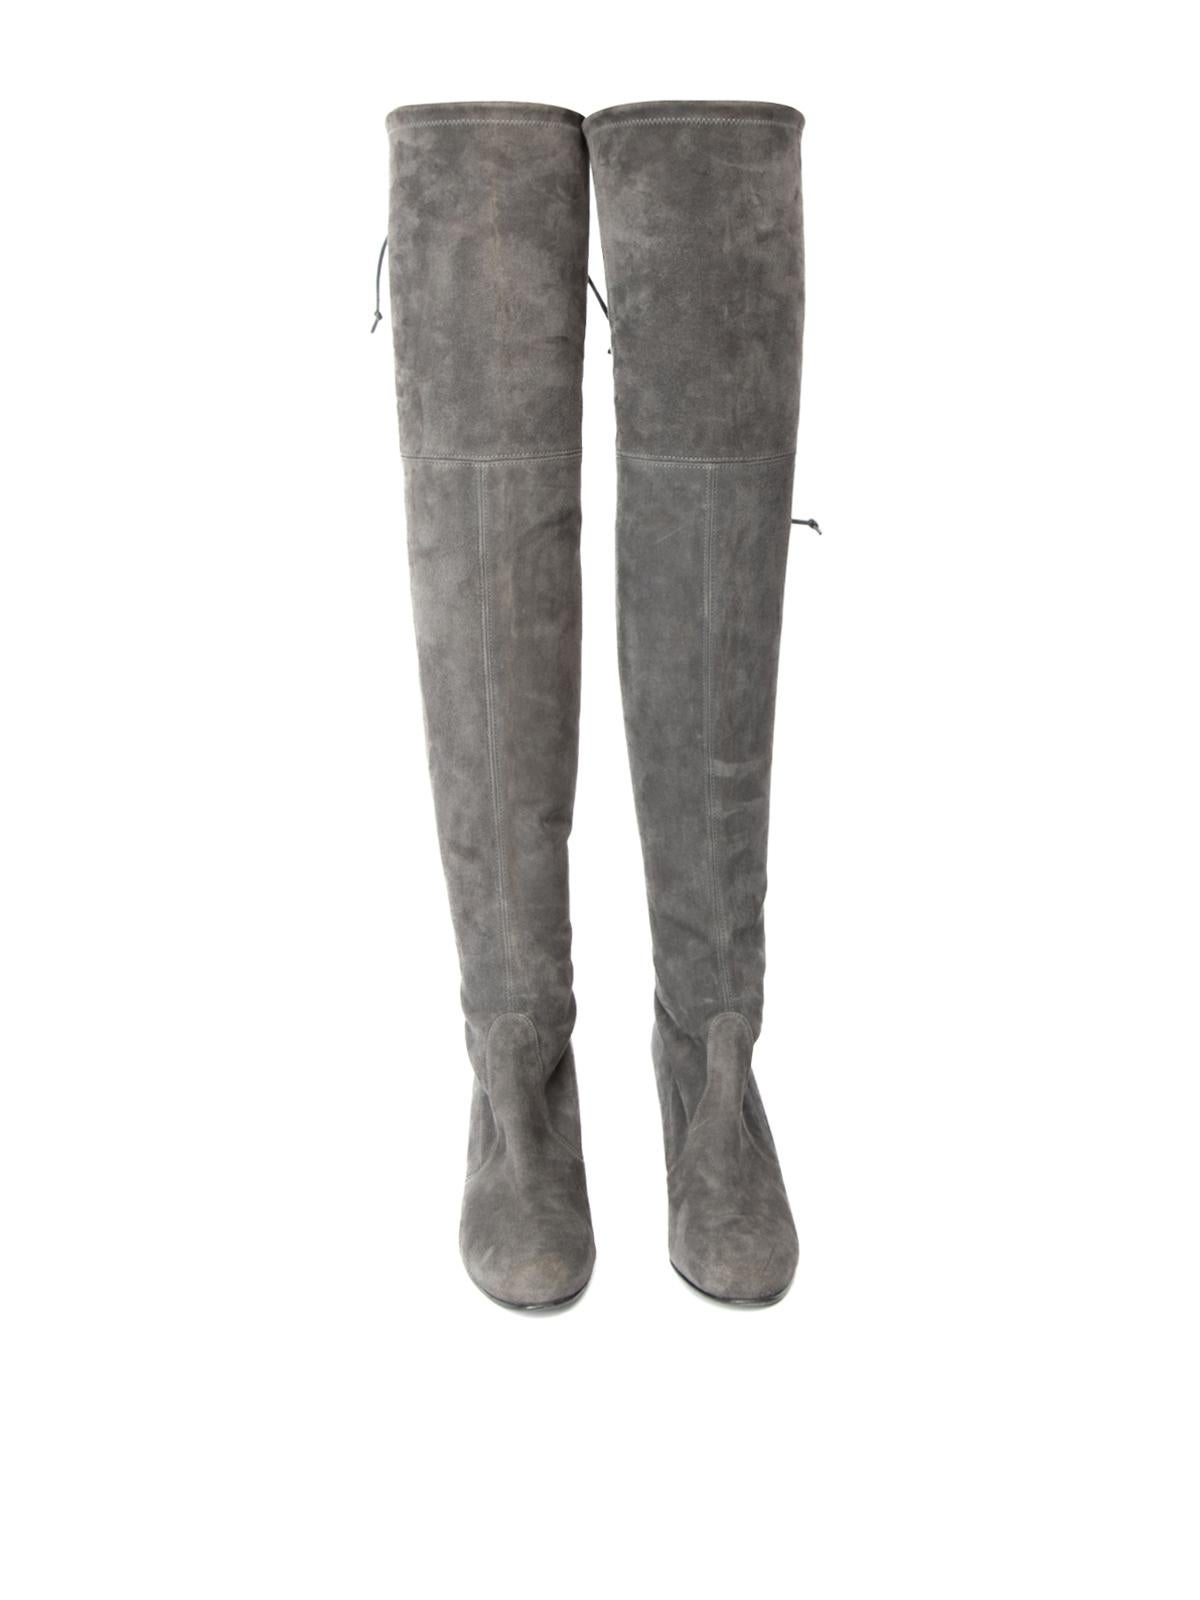 gray suede over the knee boots